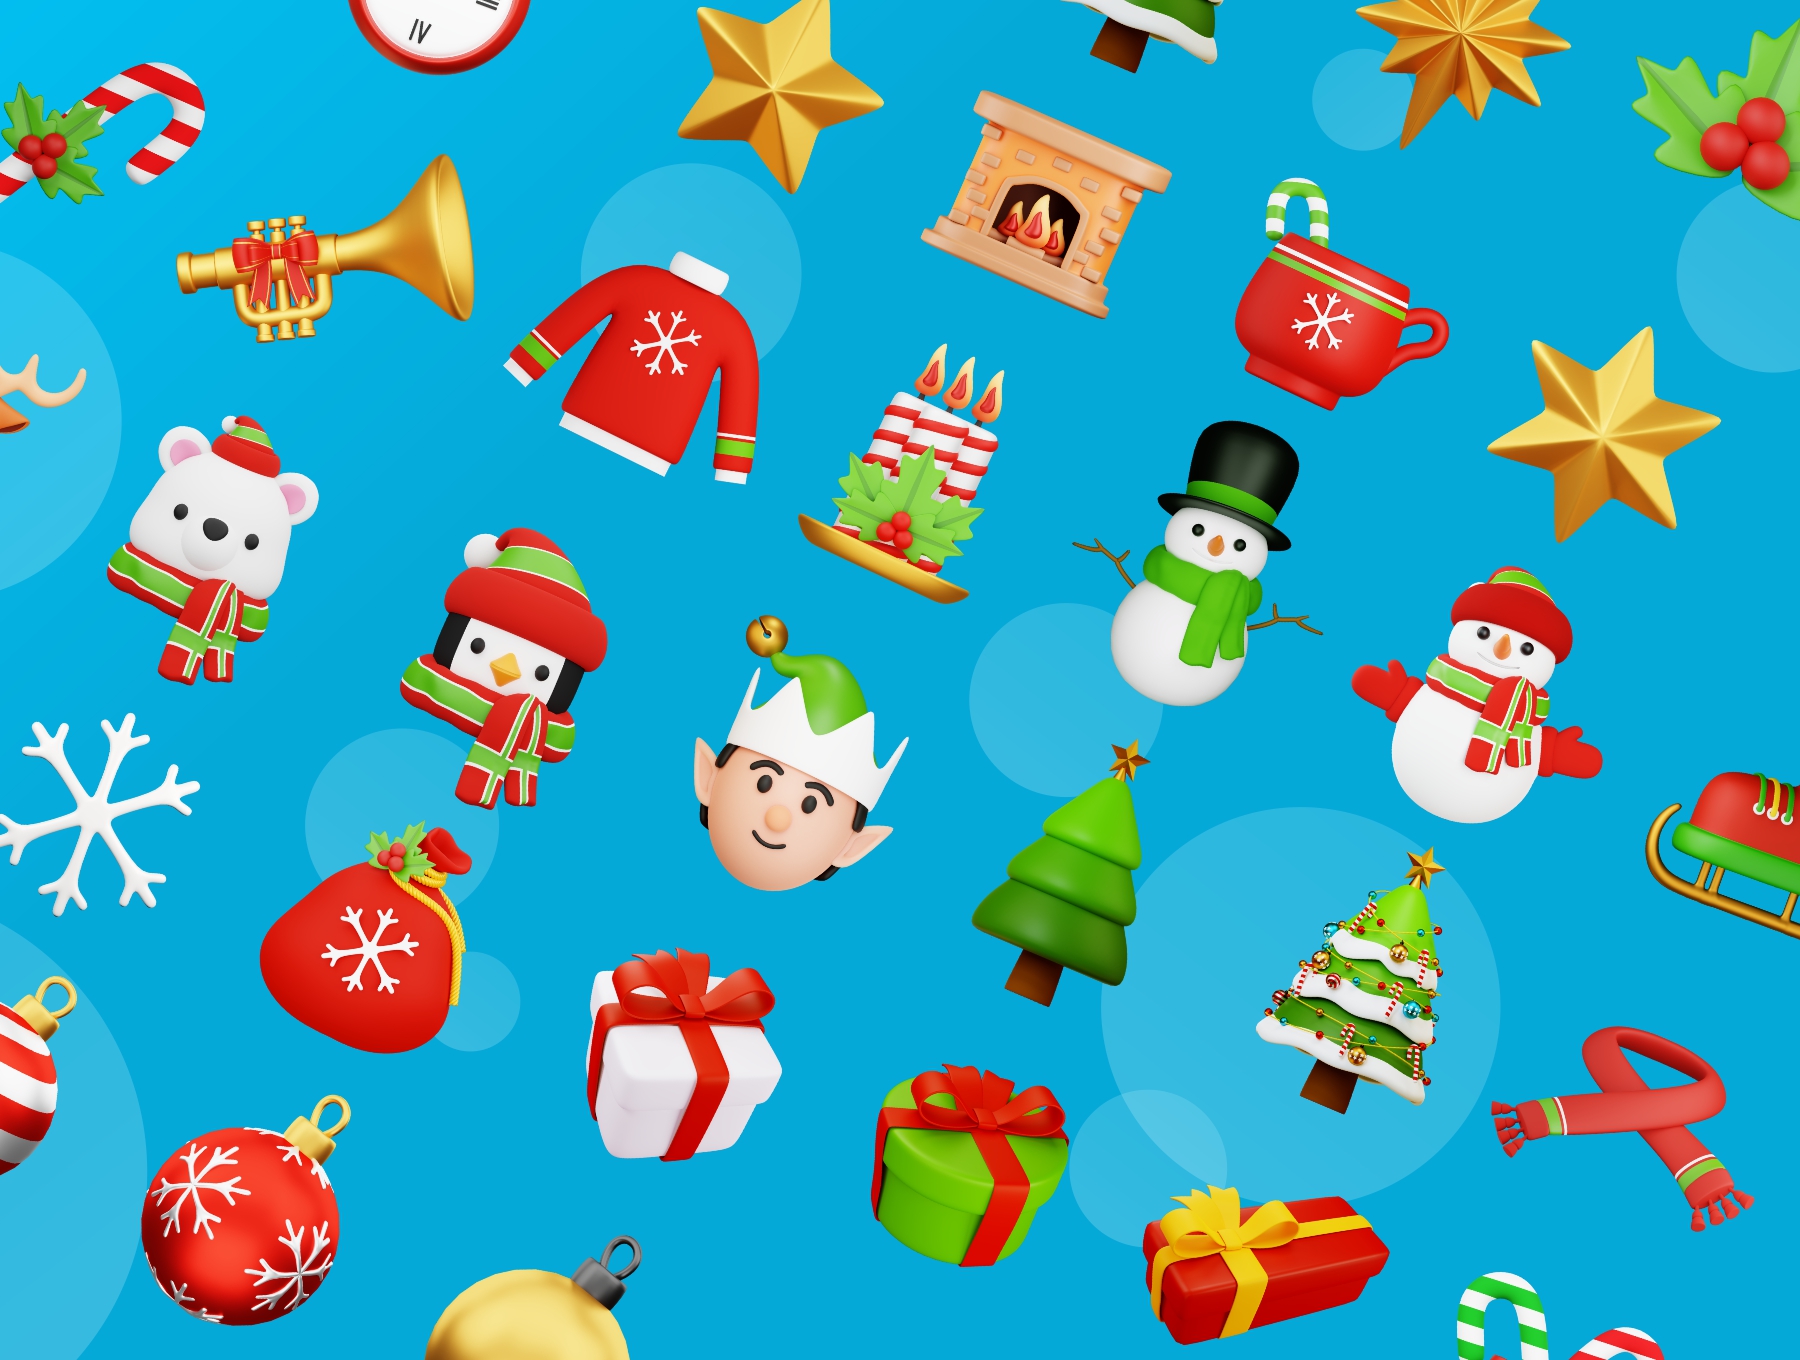 https://uicustom.com/images/images/6577416c711f1_christmas-icon-preview-uic-detail-image-8_1670487390611.jpg